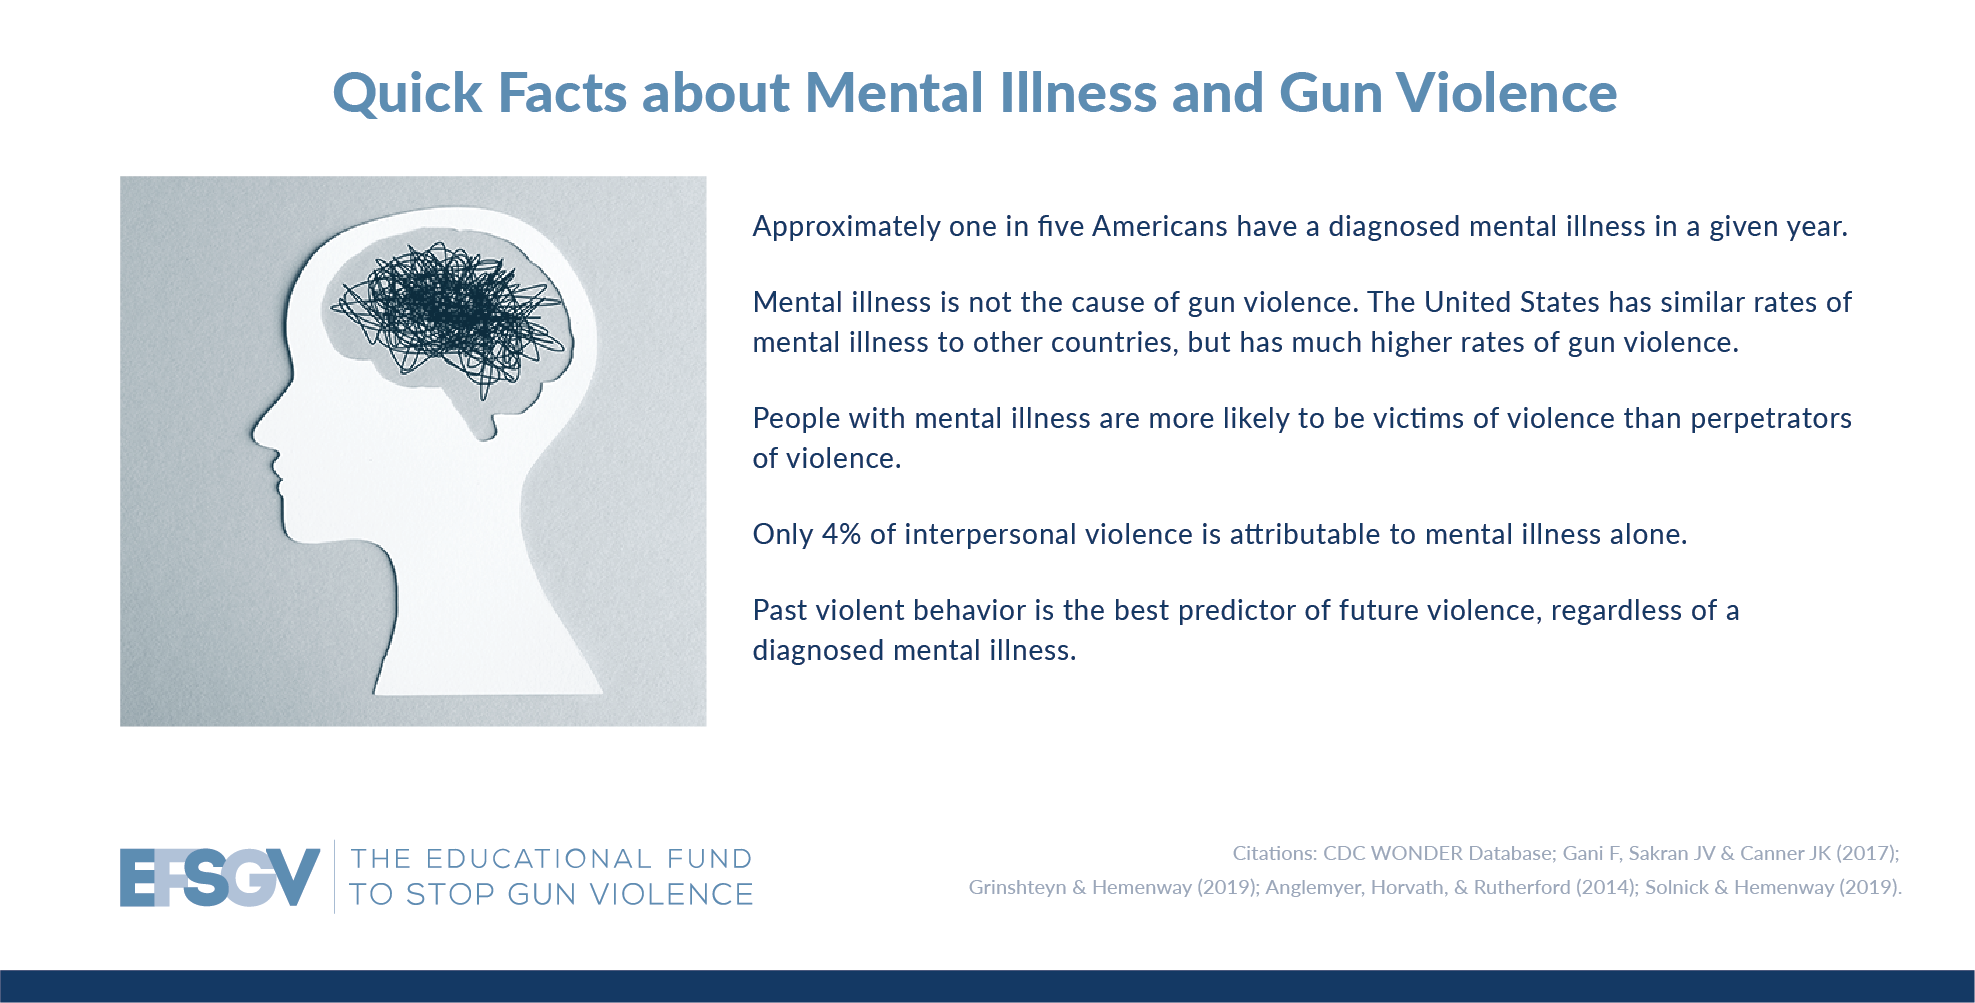 research on psychological disorders and violence indicates that